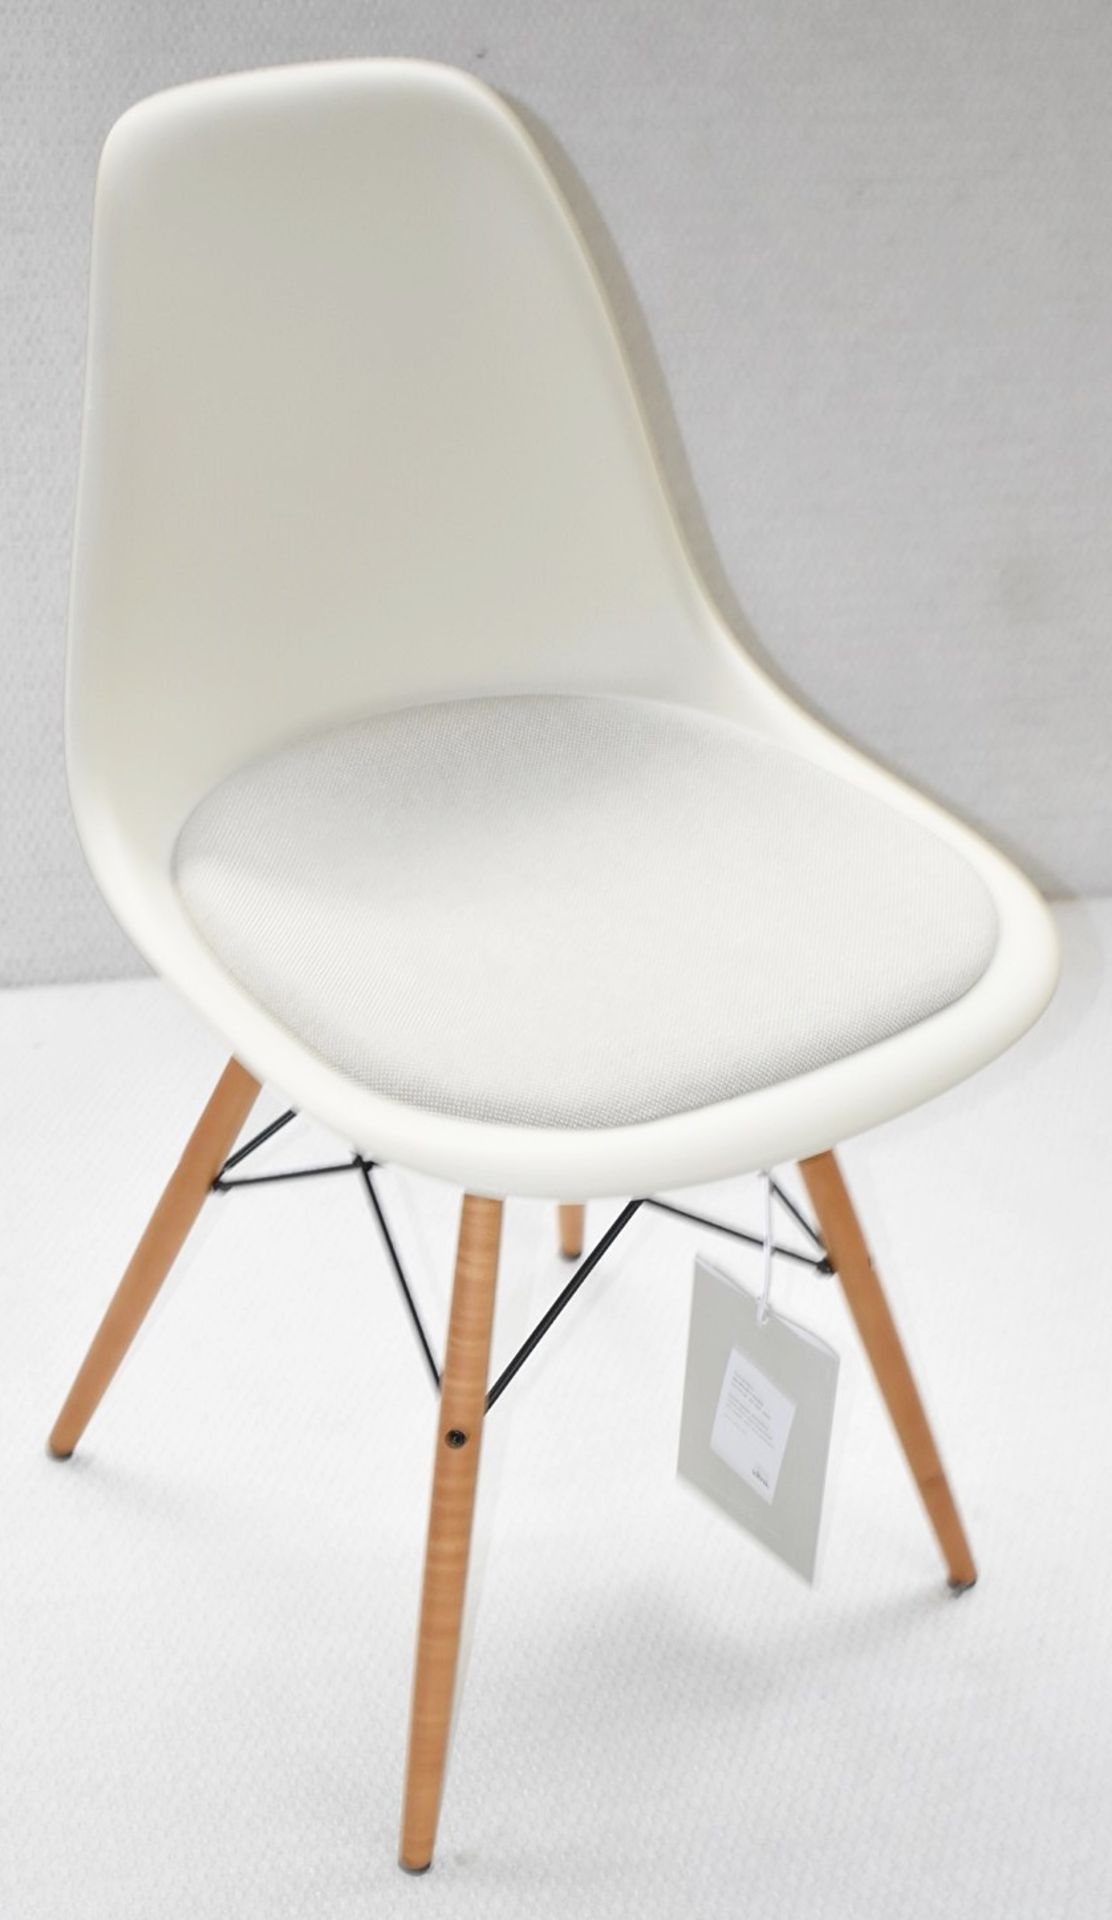 1 x VITRA Eames DSW Designer Plastic Chair With Upholstered Seat - Original RRP £660.00 - Image 2 of 8